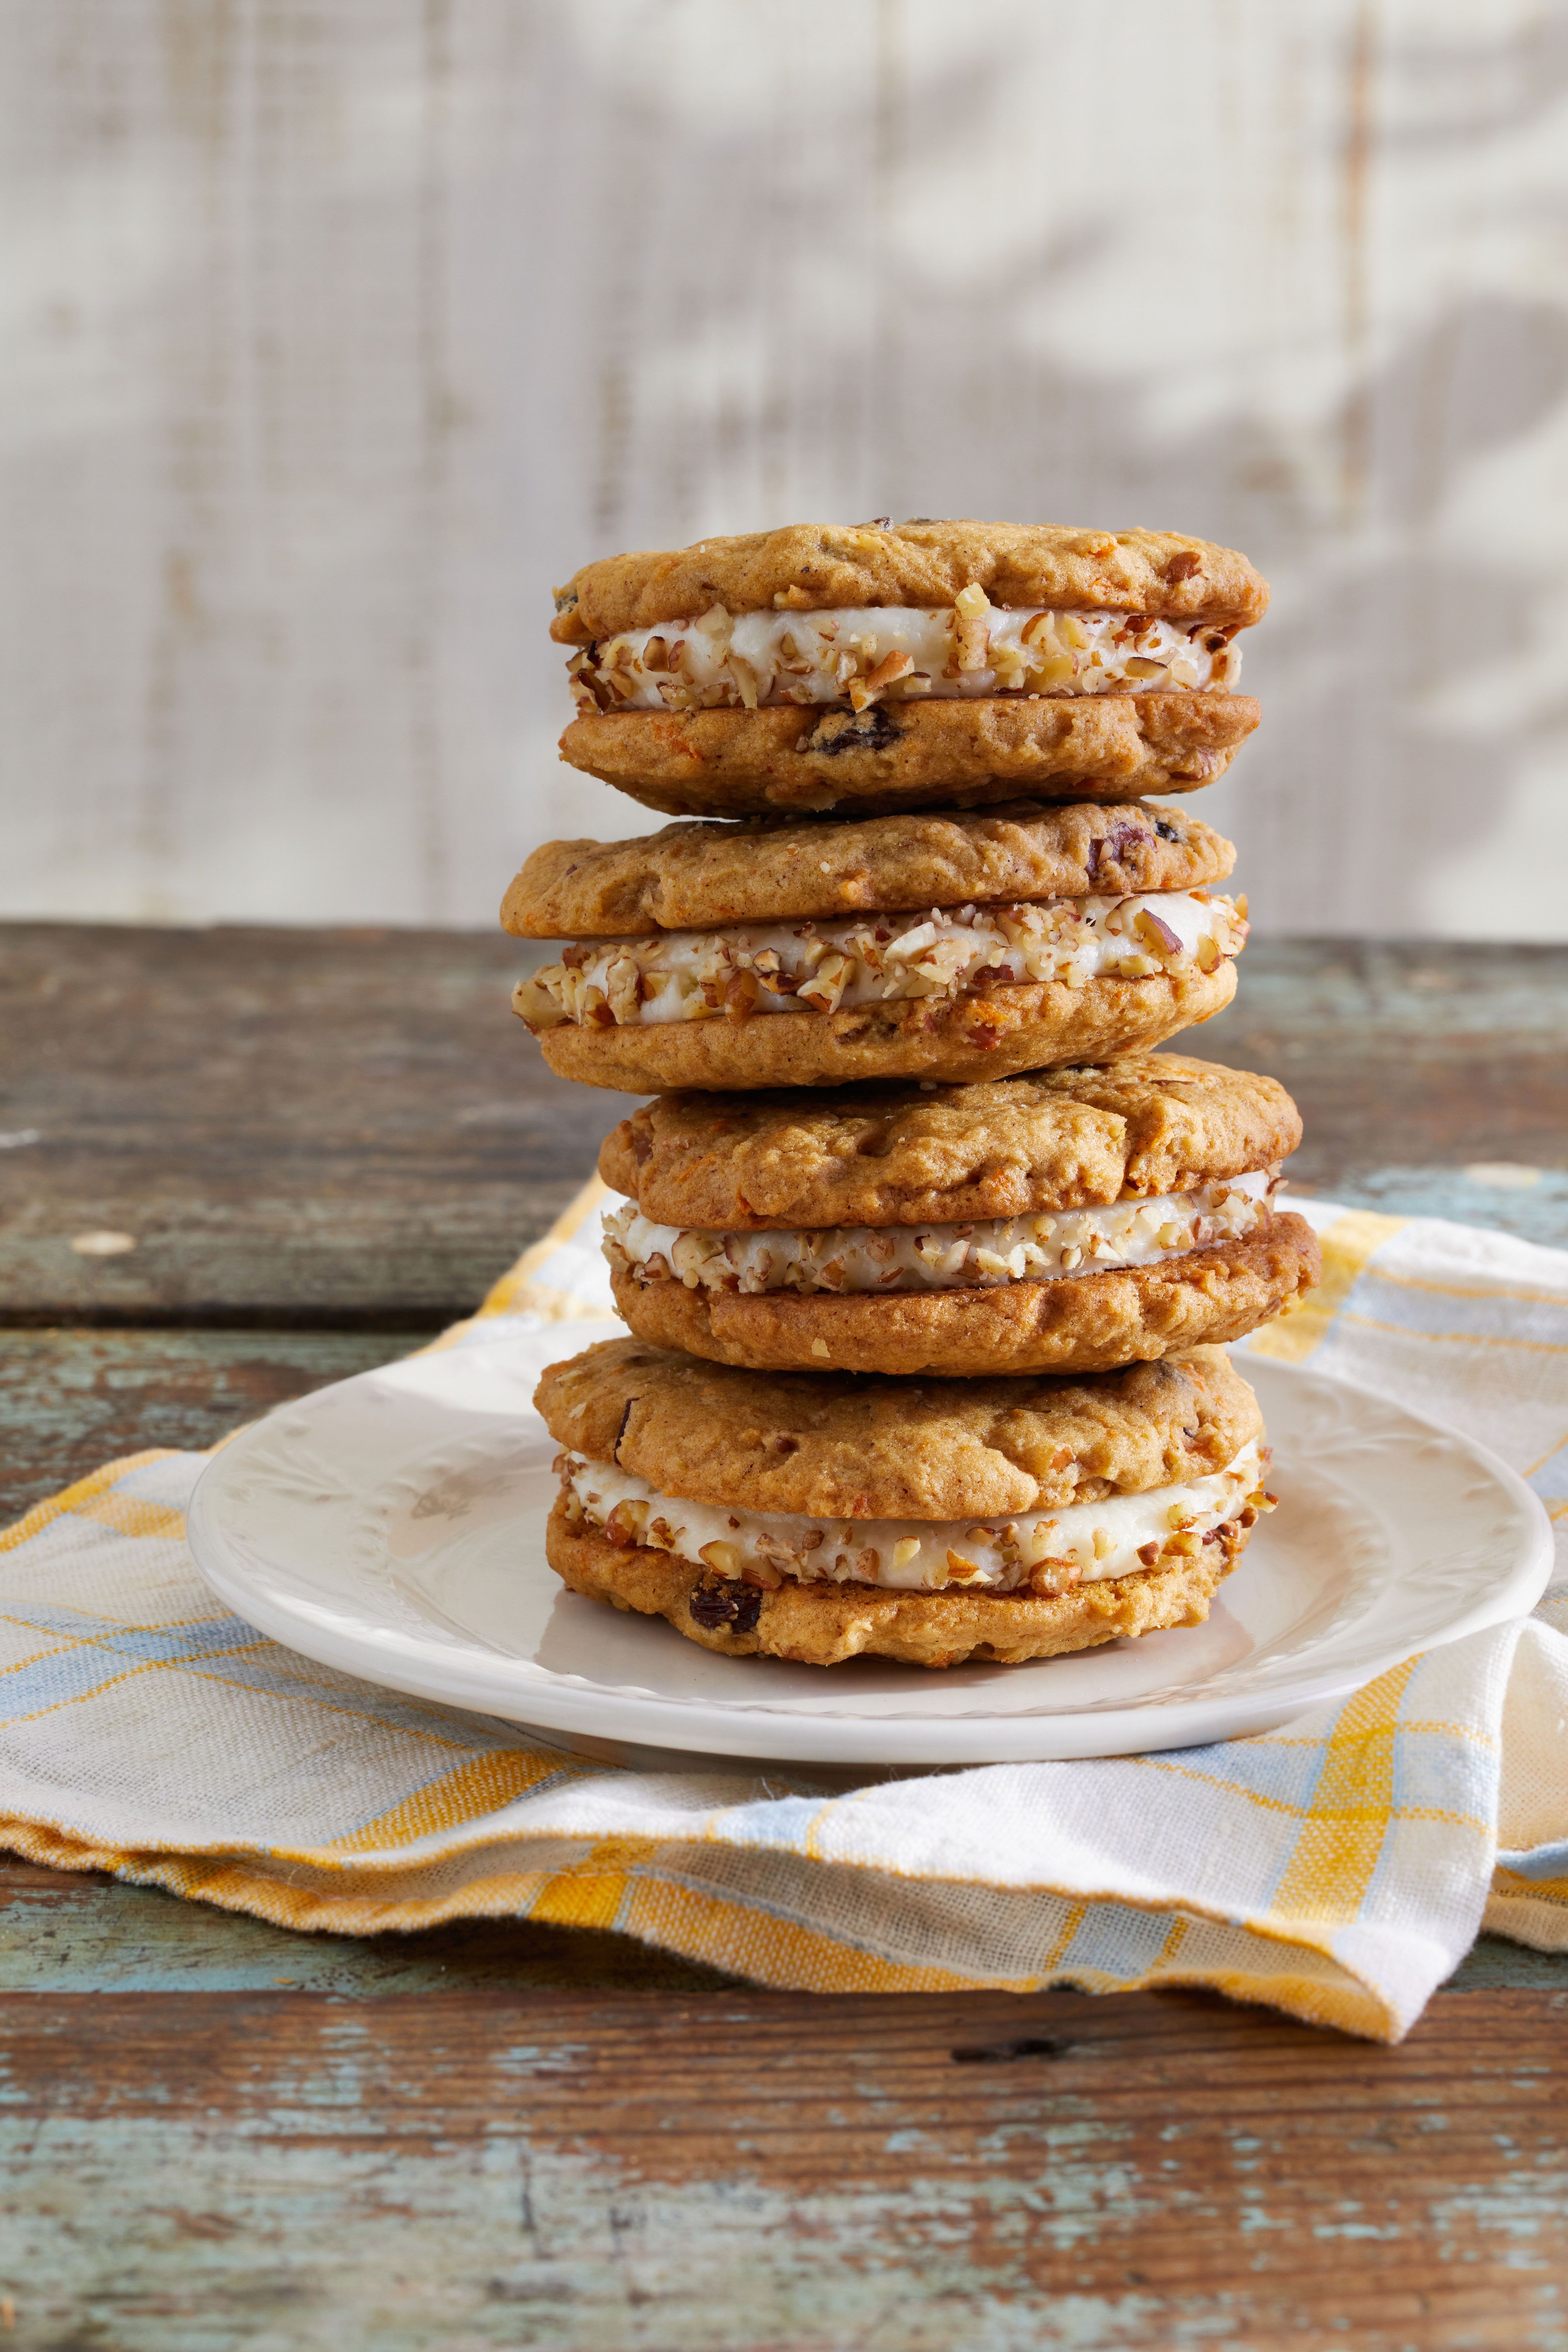 What's Good at Trader Joe's?: Trader Joe's Inside Out Carrot Cake Cookies